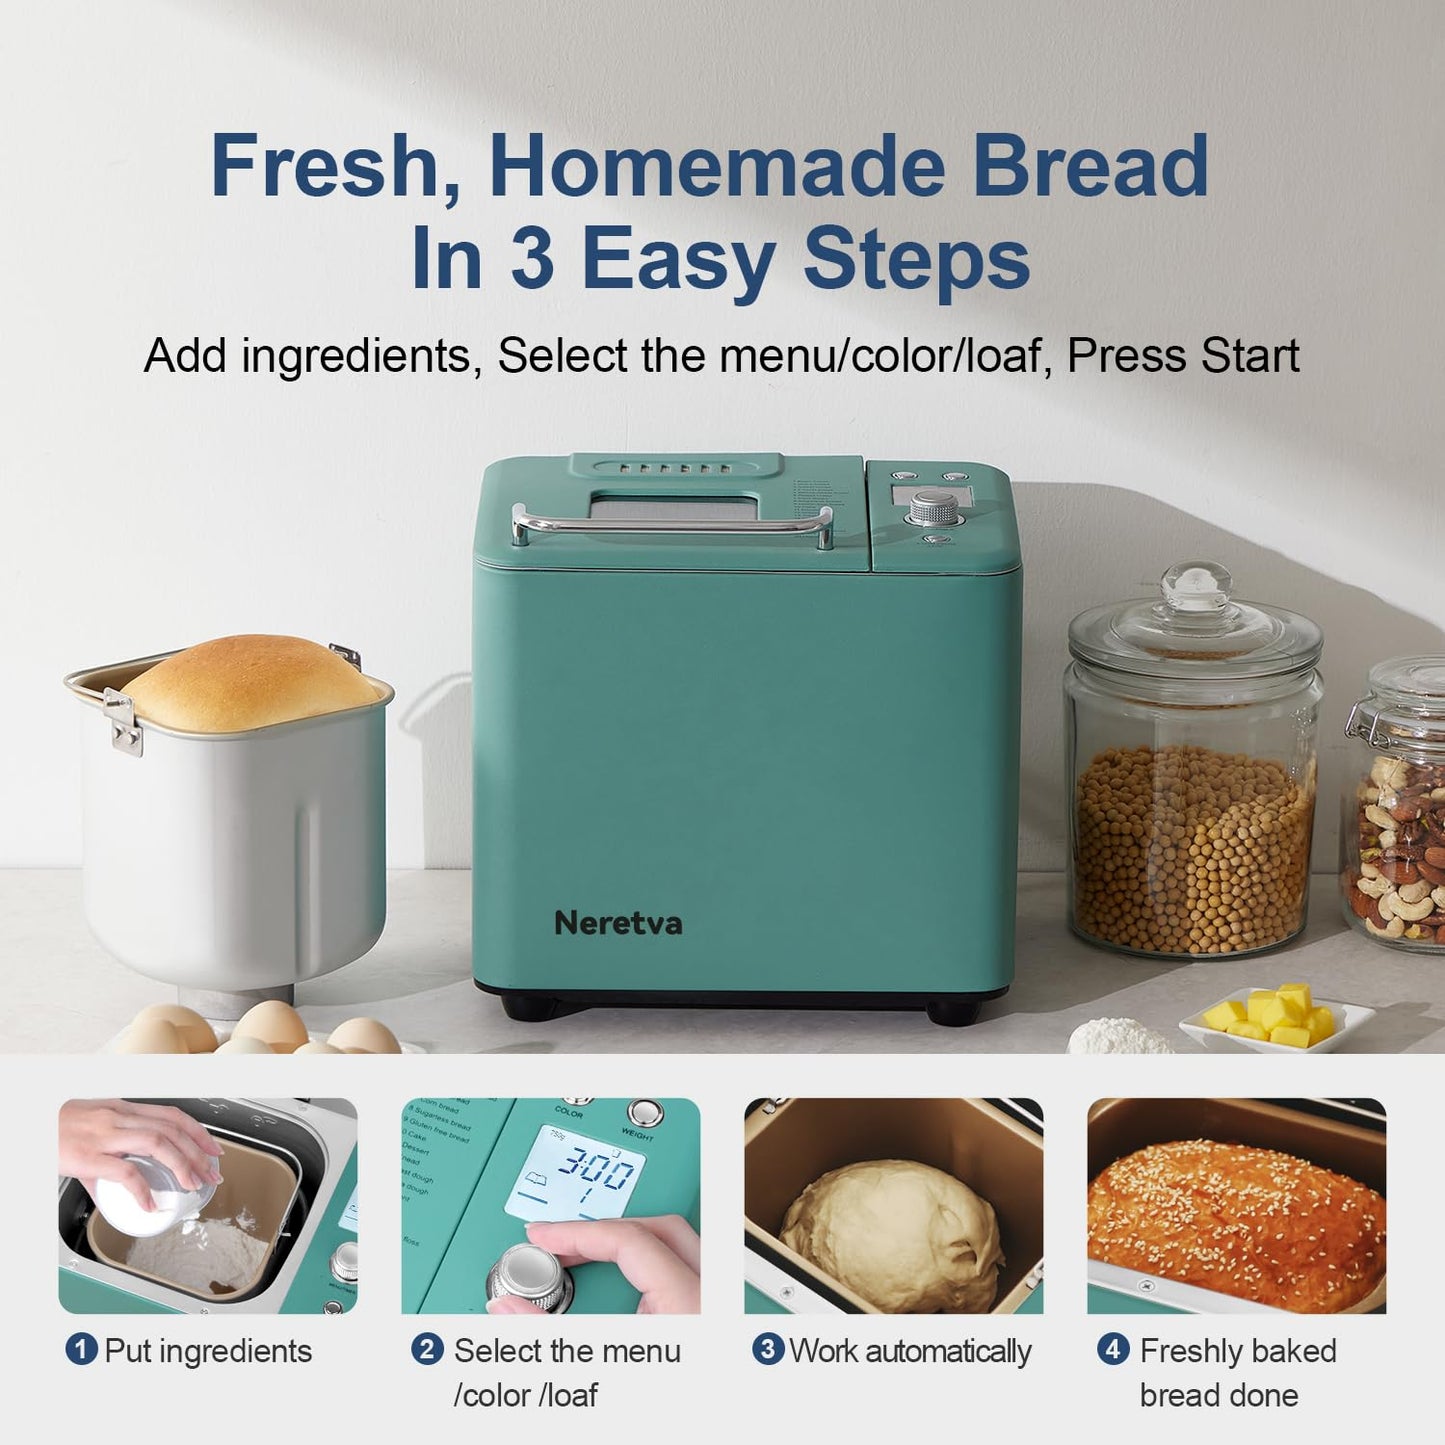 Neretva Bread Maker Machine, 20-in-1 2LB Automatic Breadmaker with Gluten Free Pizza Sourdough Setting, Digital, Programmable, 1 Hour Keep Warm, 2 Loaf Sizes, 3 Crust Colors - Receipe Booked Included